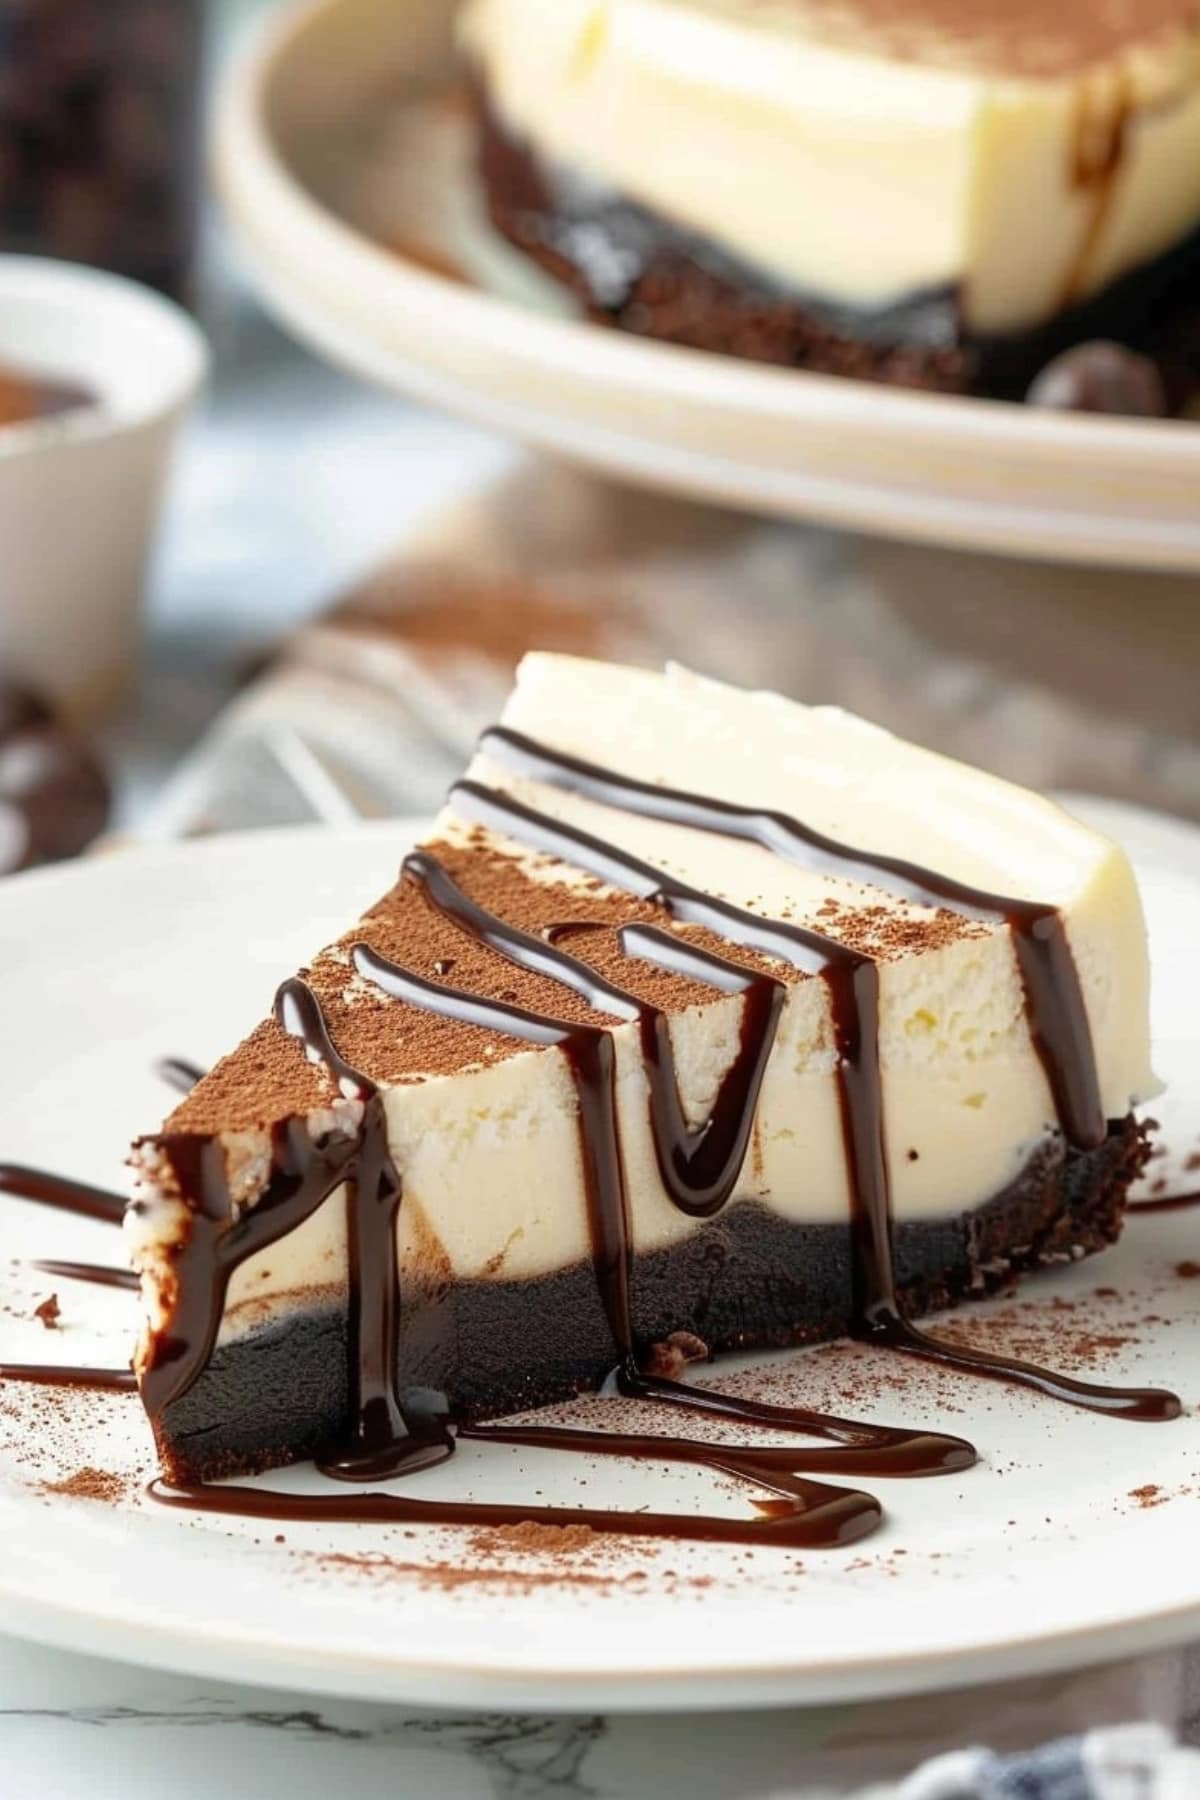 Slice of creamy cheesecake with brownie base drizzled with chocolate syrup.